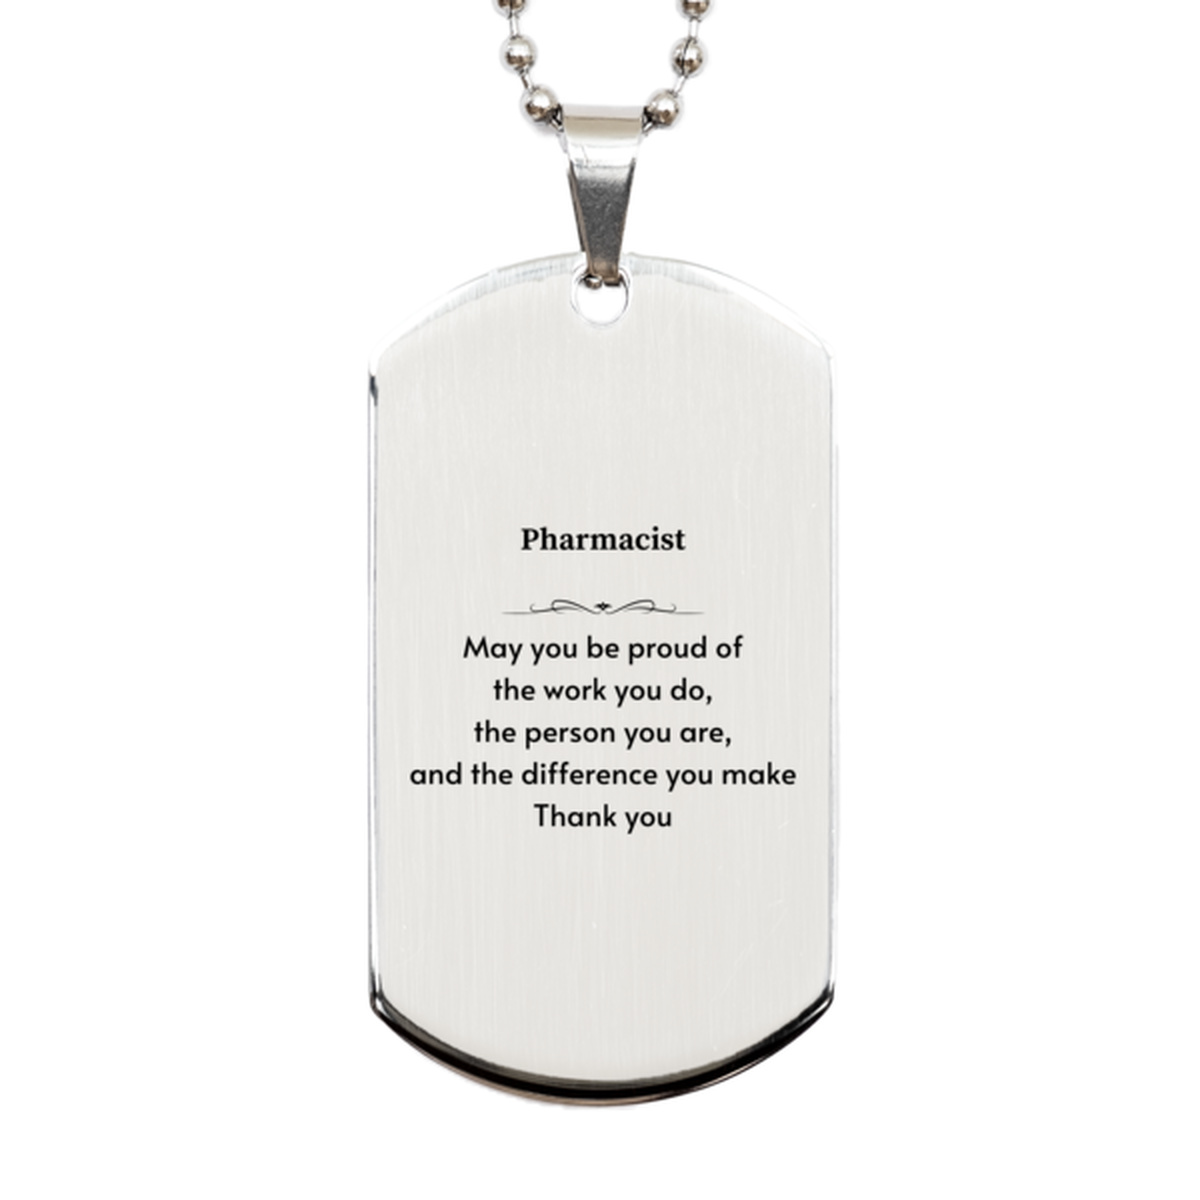 Heartwarming Silver Dog Tag Retirement Coworkers Gifts for Pharmacist, Pharmacist May You be proud of the work you do, the person you are Gifts for Boss Men Women Friends